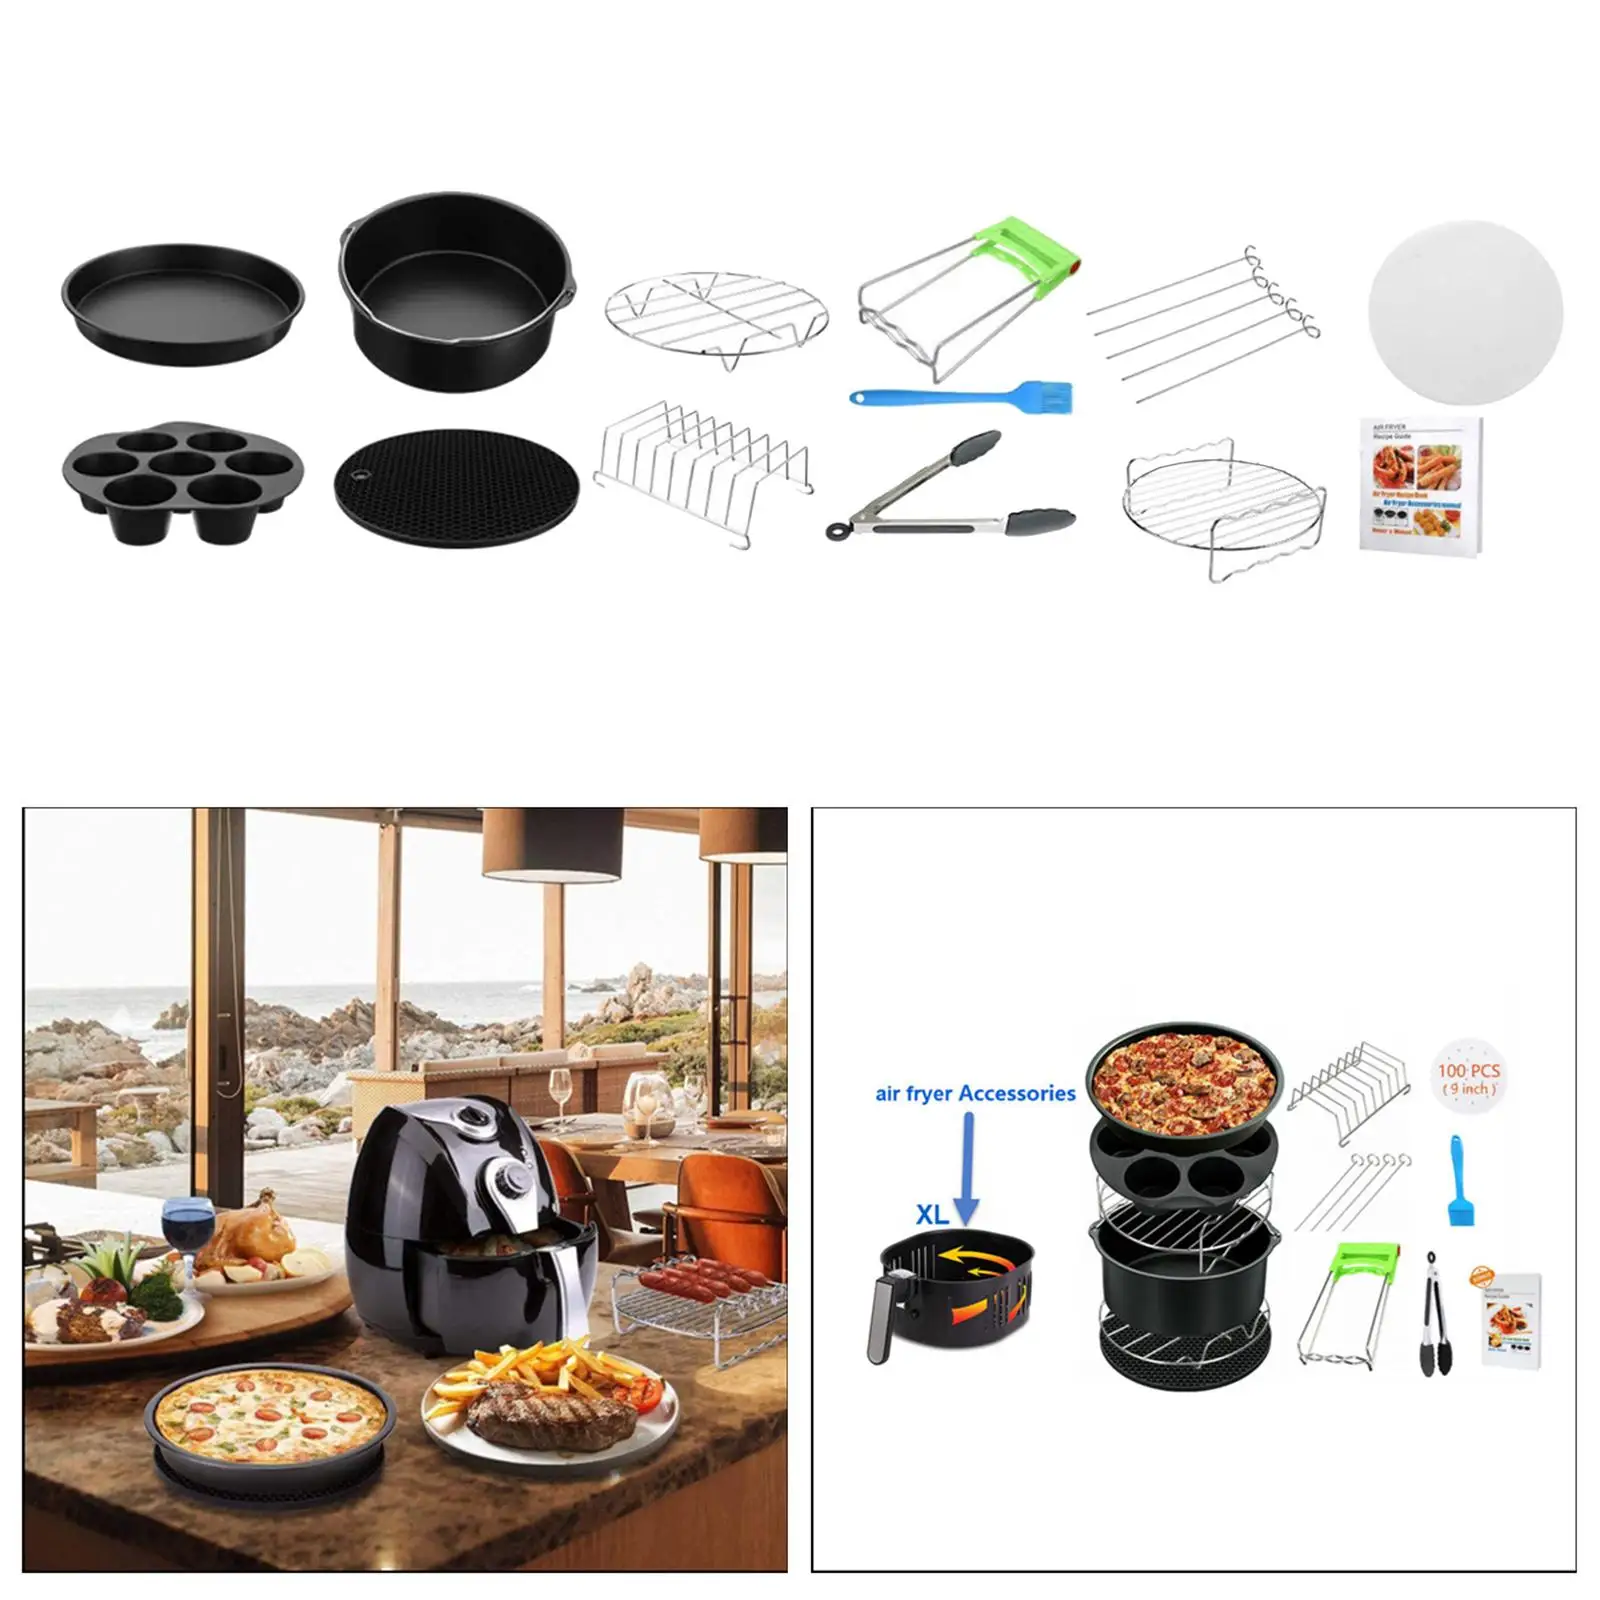 https://ae01.alicdn.com/kf/S006aad3afcd9424a9393c205e1abea38o/Set-of-12-Air-Fryer-Accessories-for-9-Inch-Fryer-Nonstick-Pan-for-5-3-6.jpg